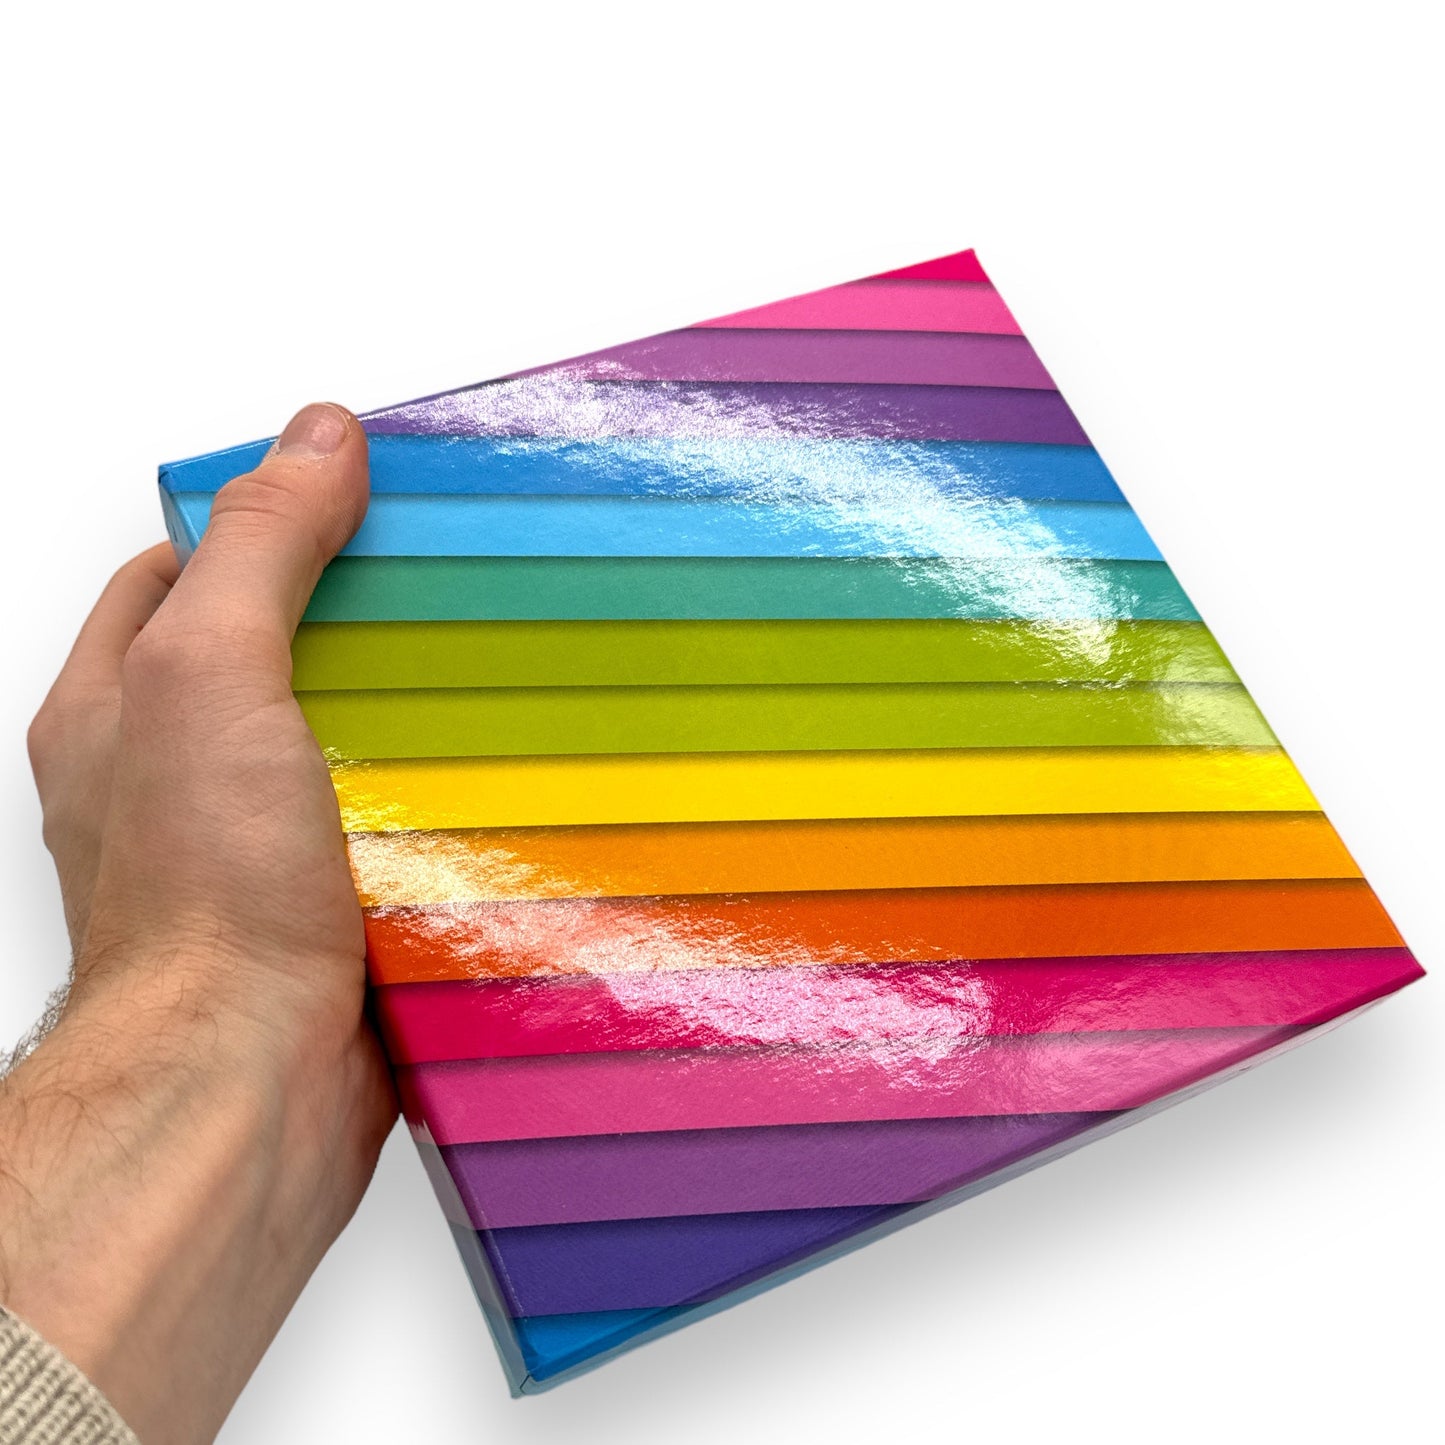 Rainbow Cardboard Box - 18x6.8 cm - Add Color and Style to Your Storage Space